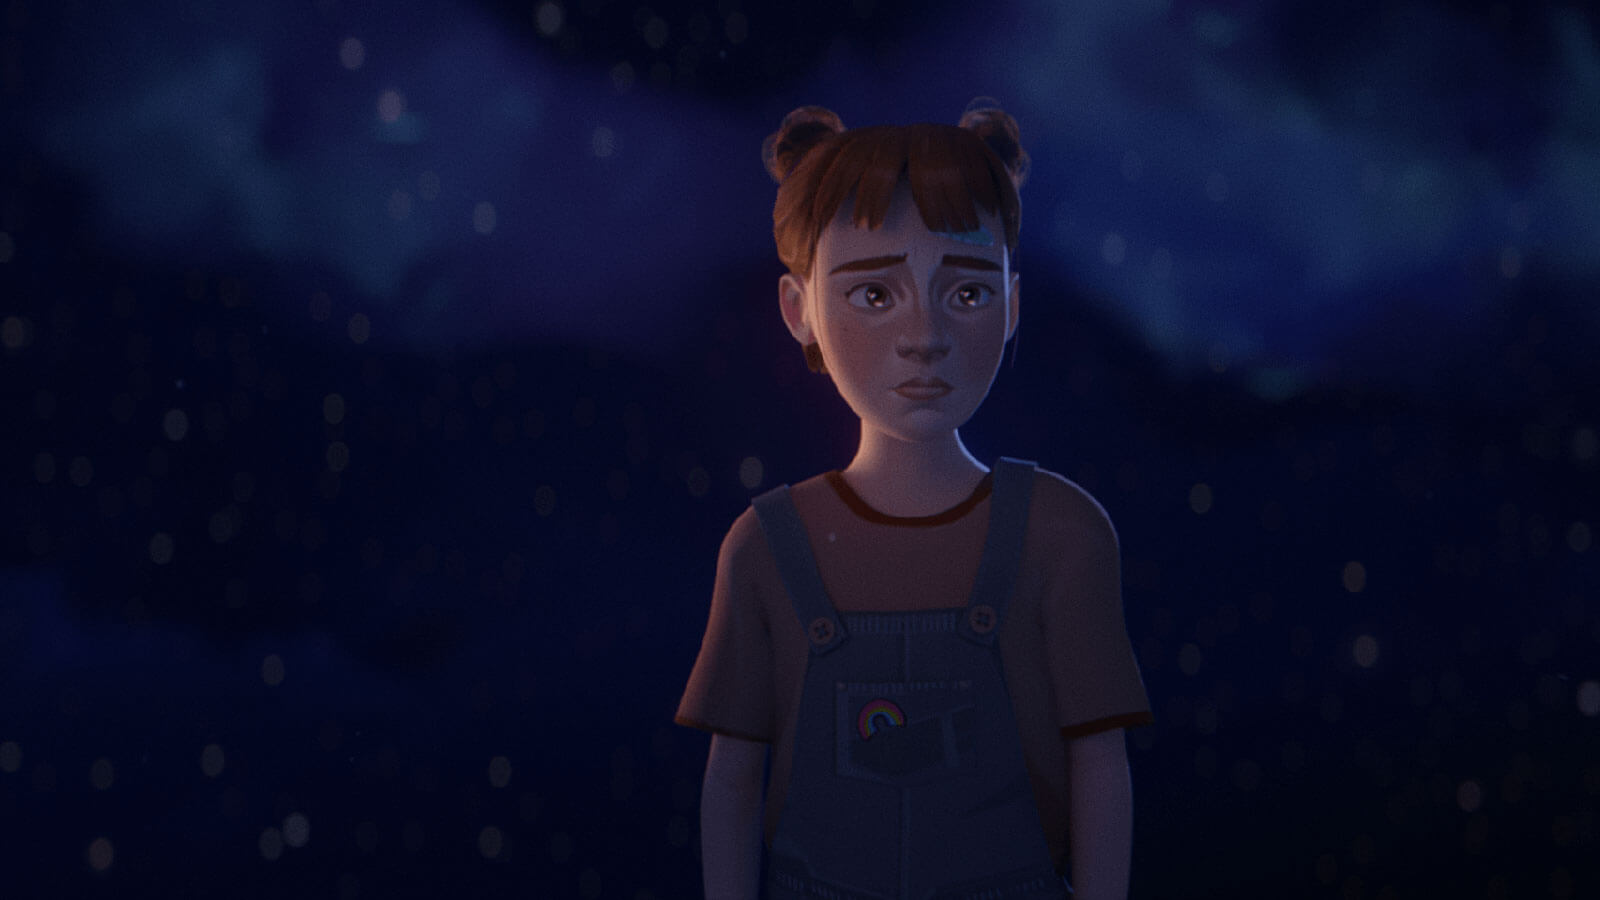 Girl wearing overalls appears melancholy on a blue background adorned with stars.